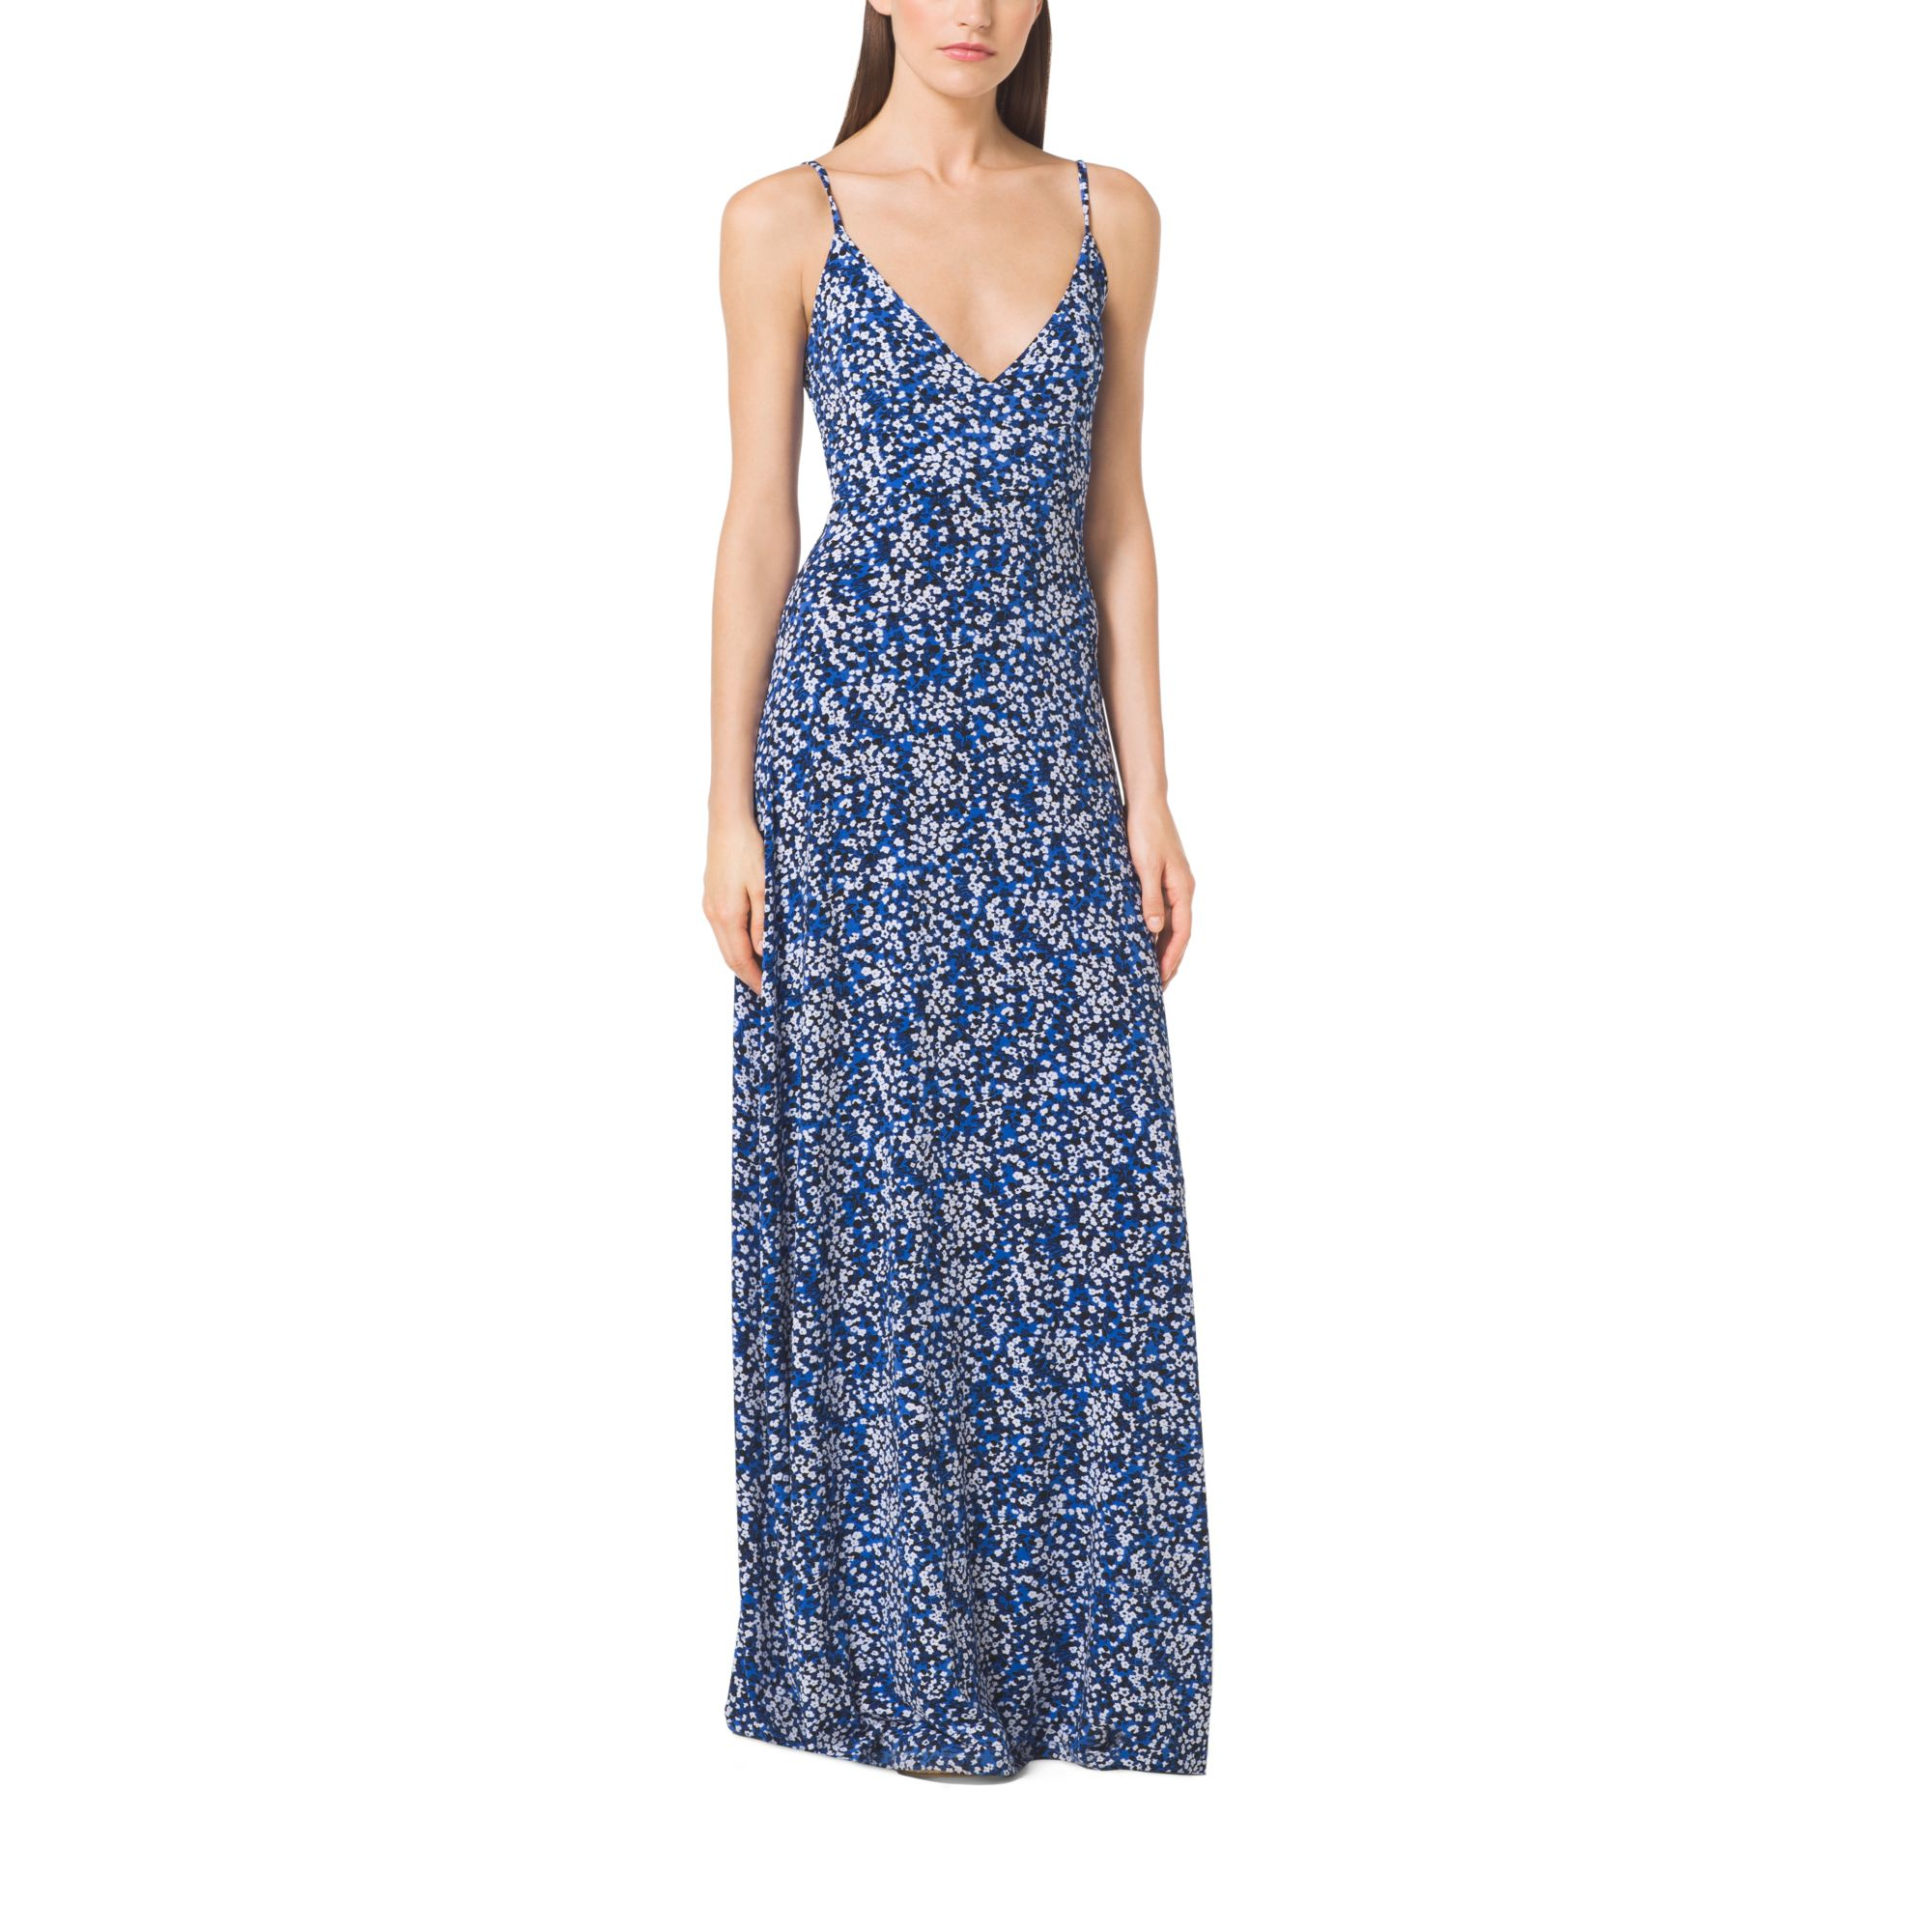 Michael Kors Synthetic Floral-print Matte-jersey Maxi Dress in Blue - Lyst